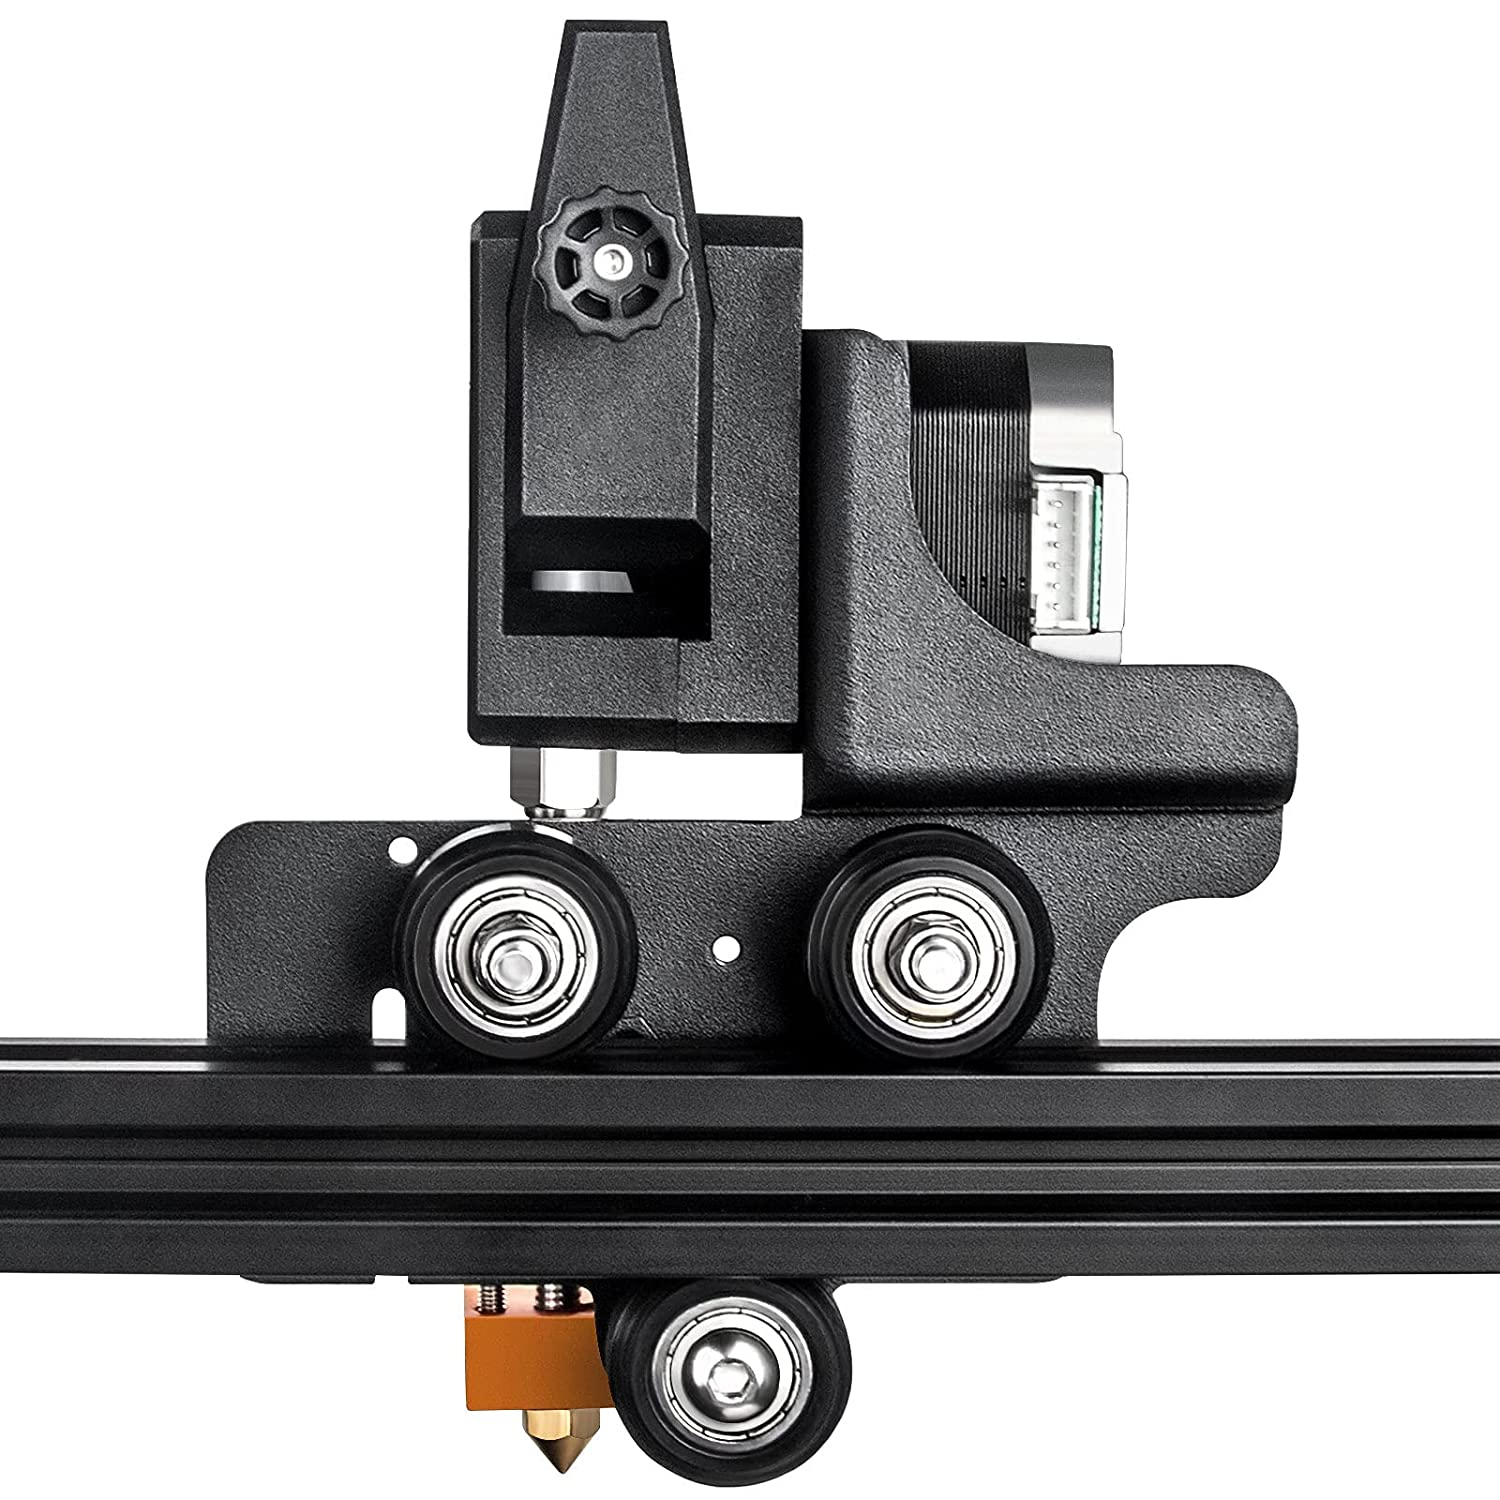 Direct Drive Upgrade Kit for Creality Ender 5/Pro - Only Compatible with BMG Extruder